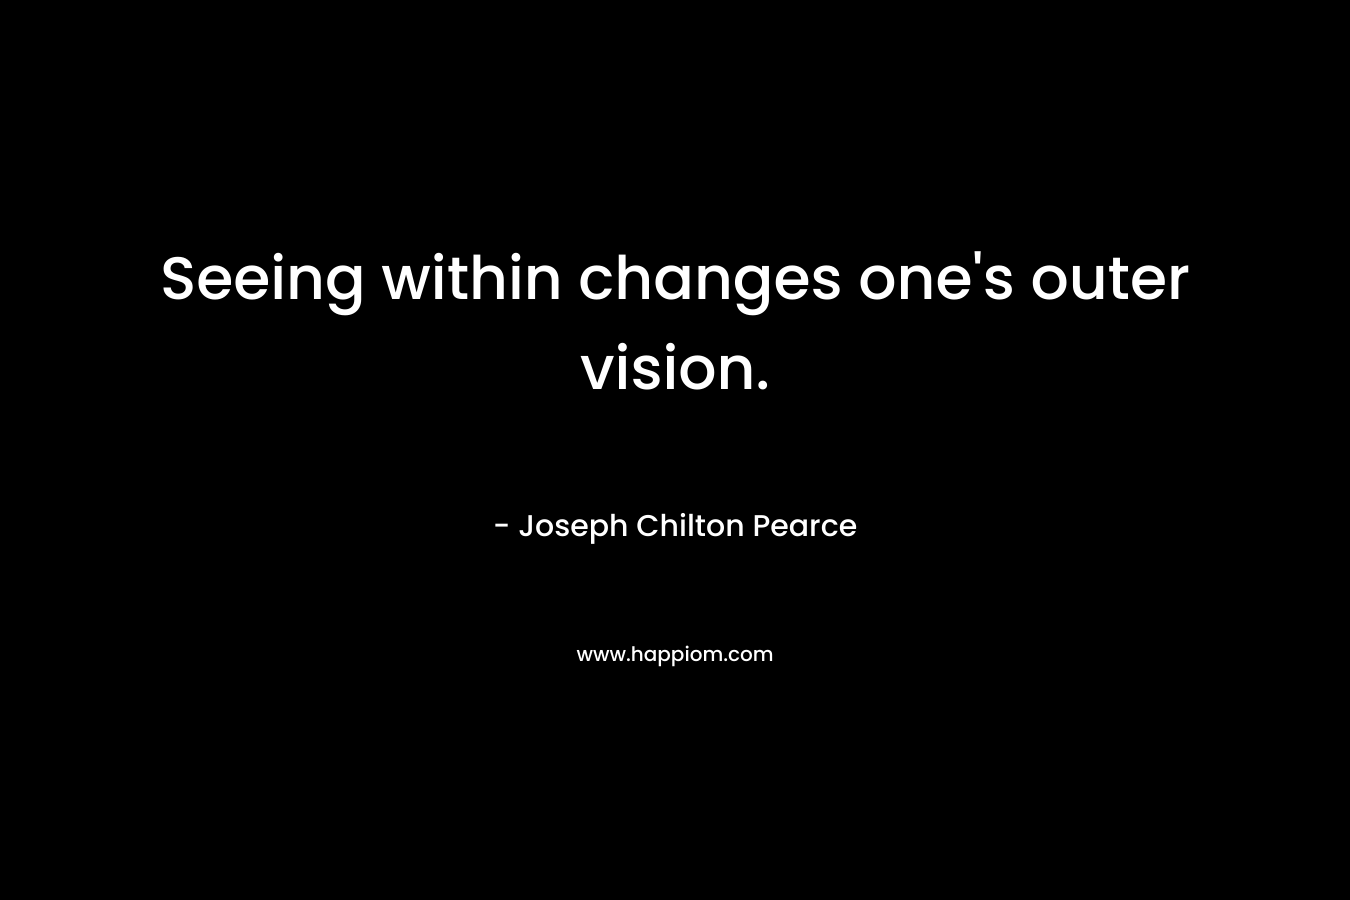 Seeing within changes one's outer vision.